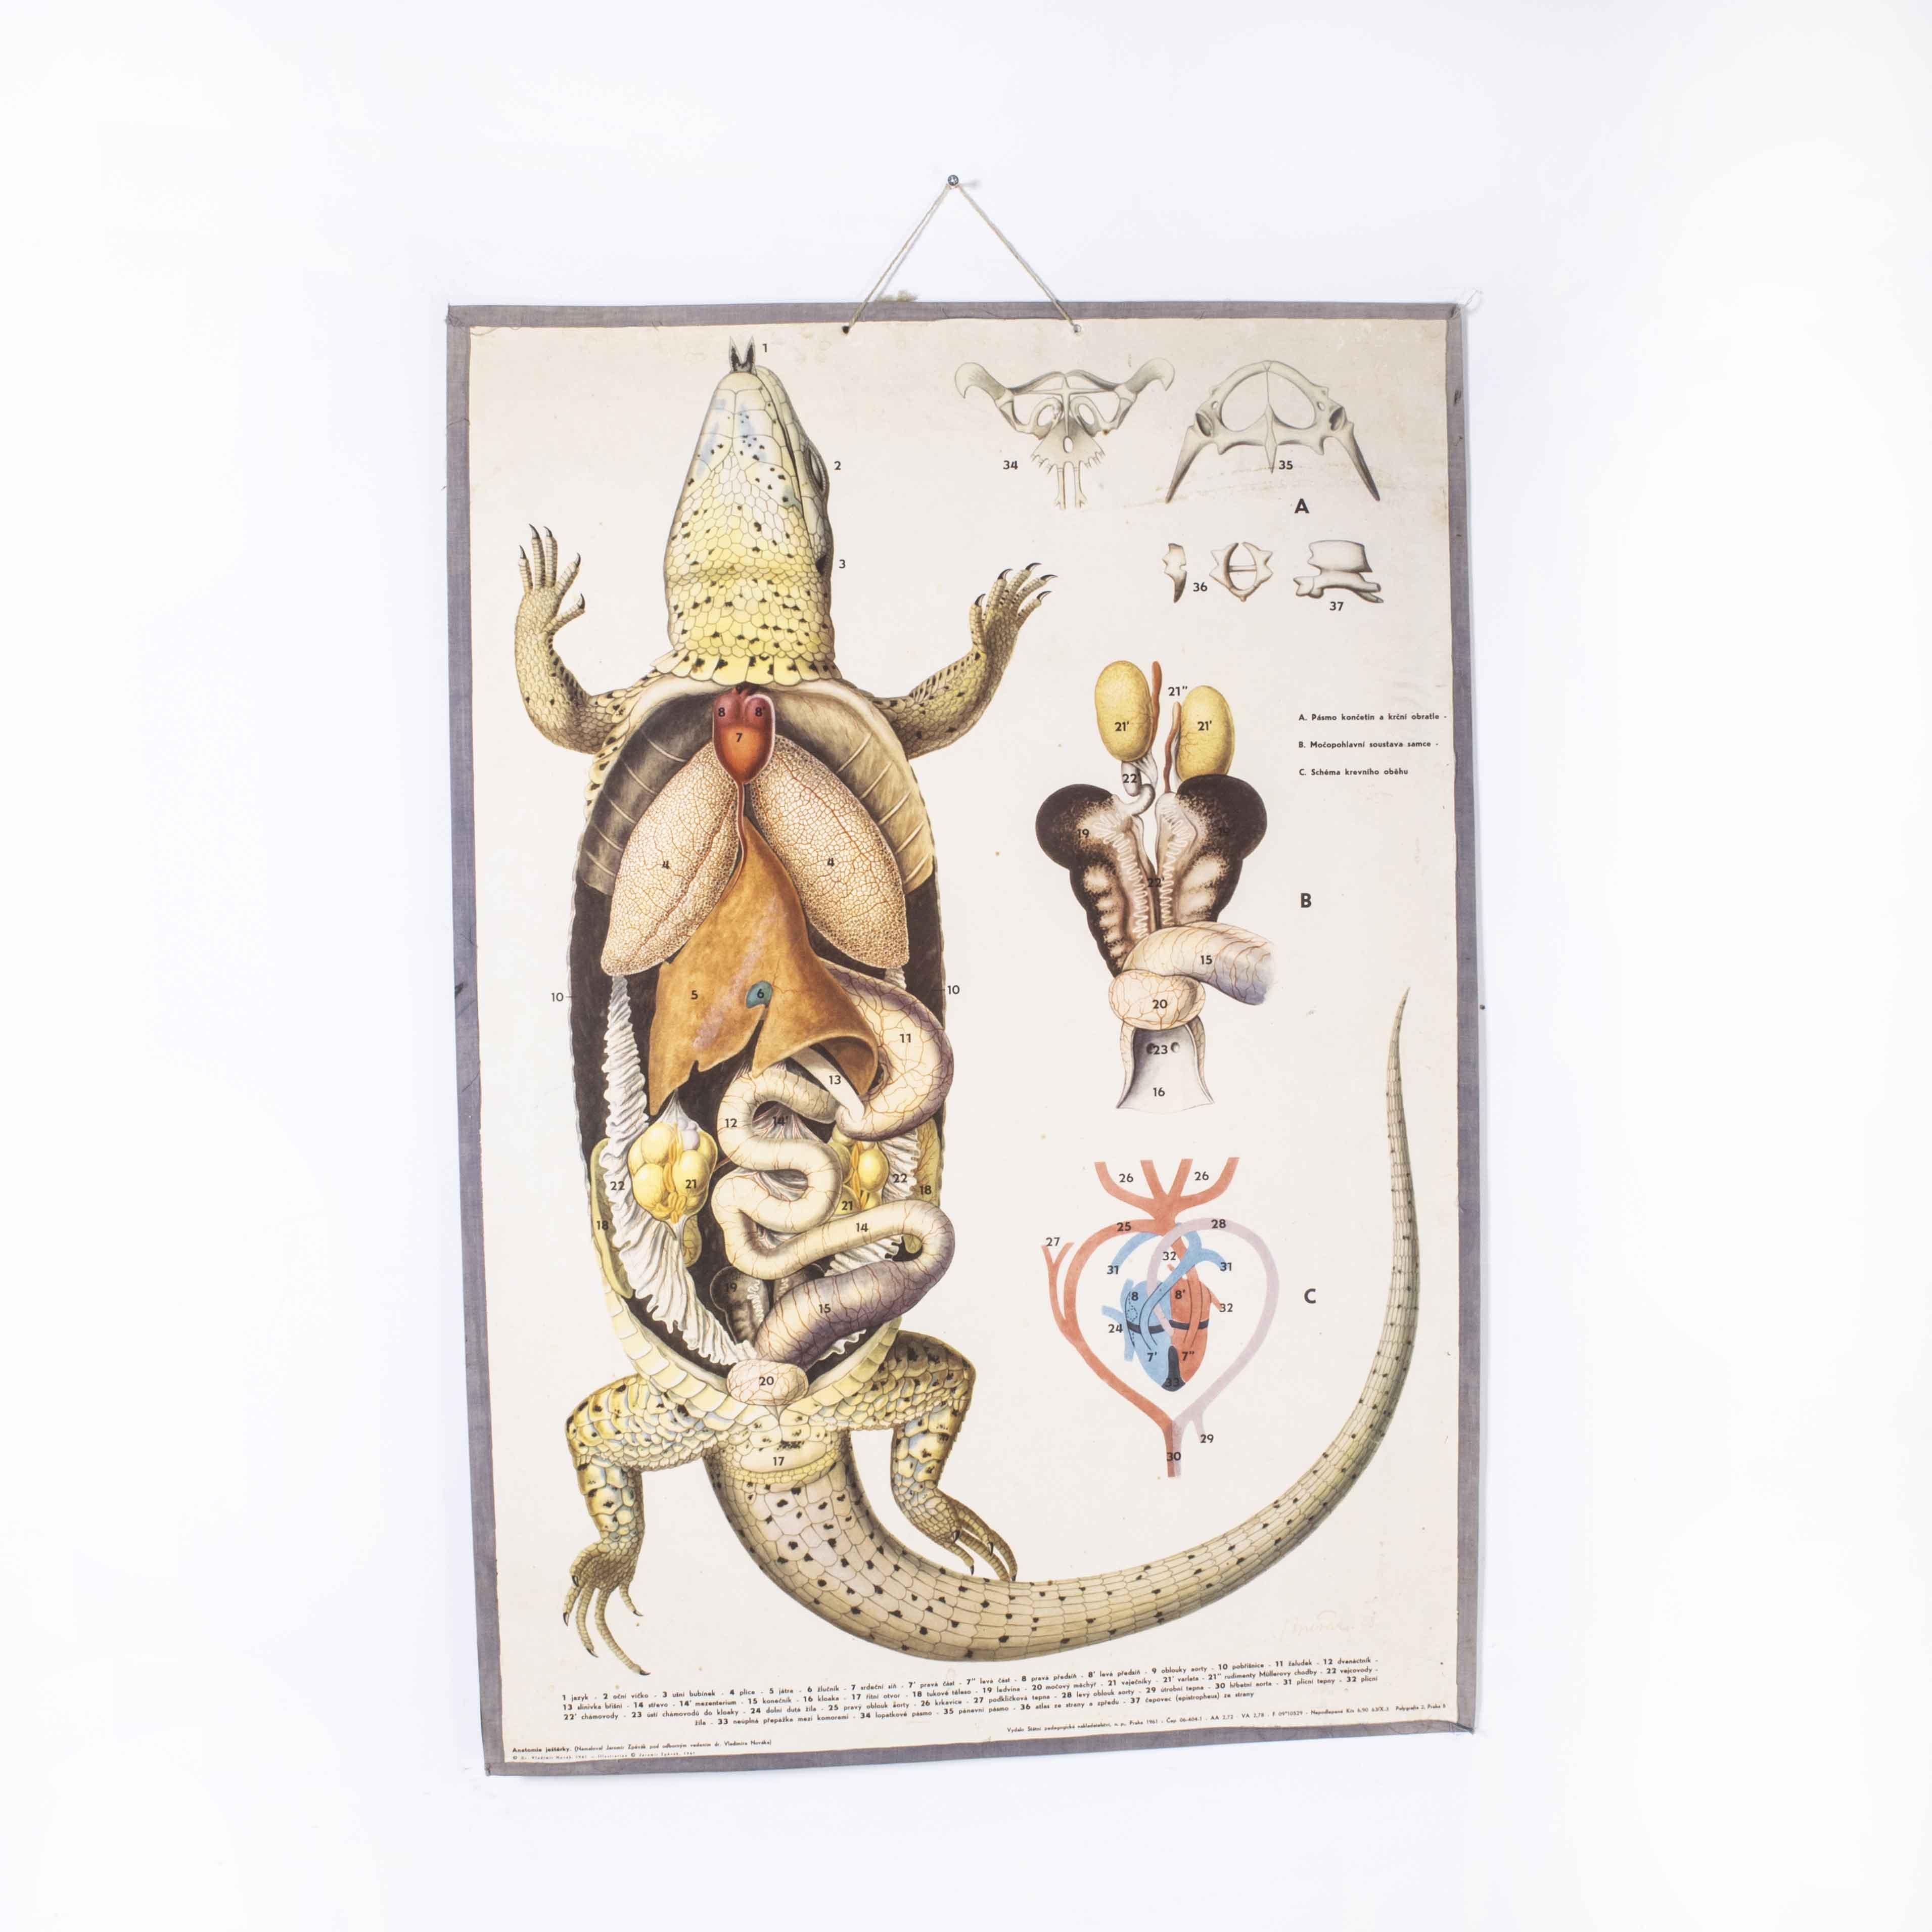 1960’s Lizard educational poster
1960’s Lizard educational poster. 20th Century Czechoslovakian educational chart. A rare and vintage wall chart from the Czech Republic illustrating the anatomy of a lizard. This rigid card backed poster is in